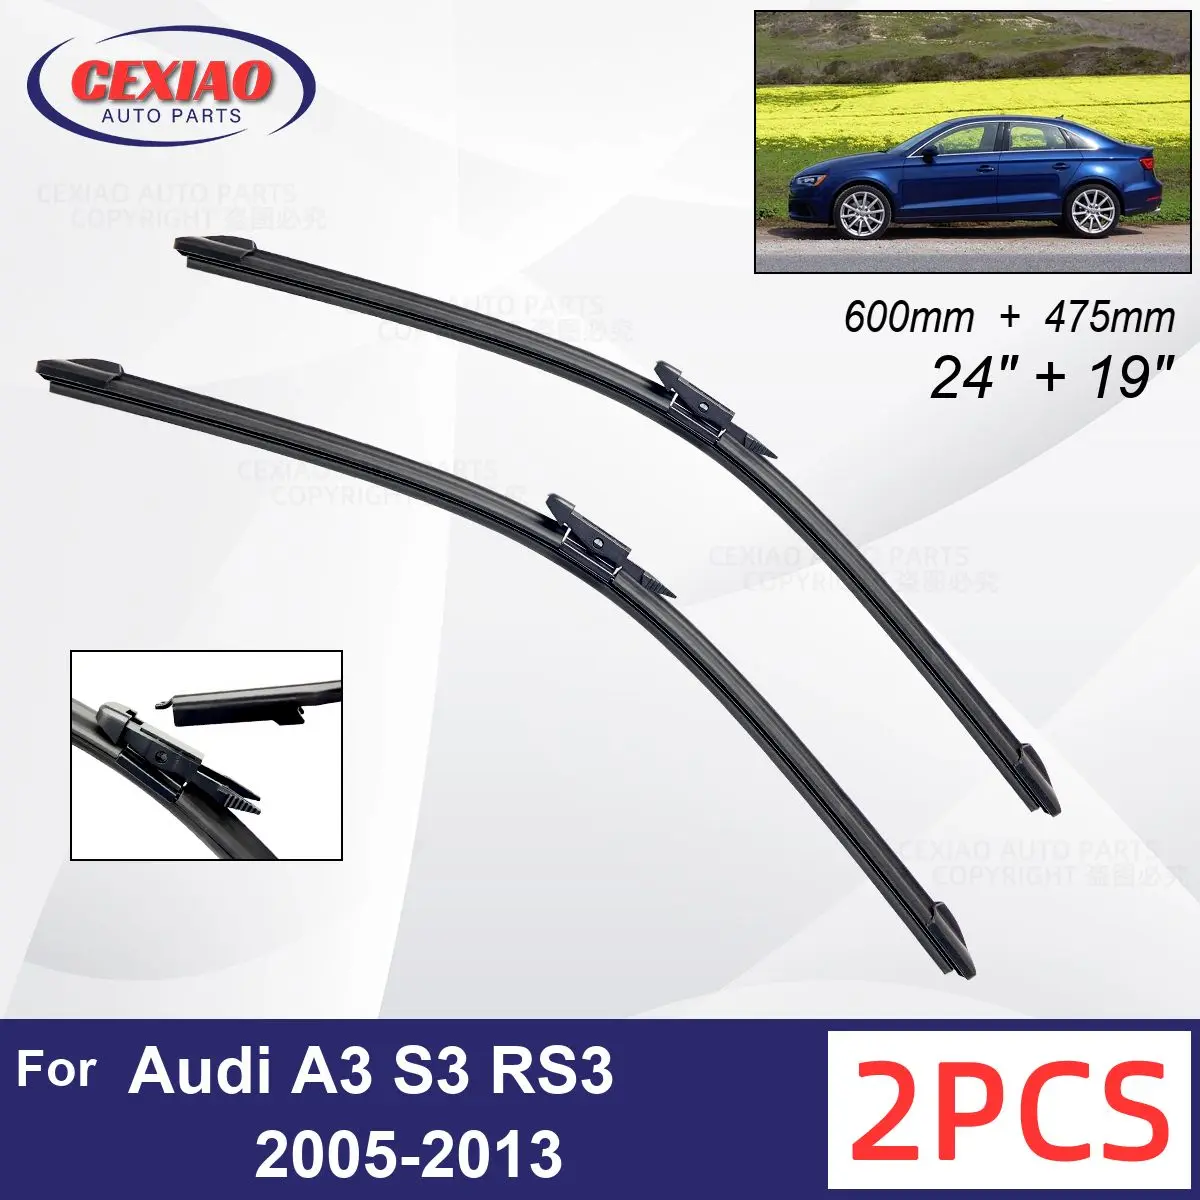 

Car Wiper For Audi A3 S3 RS3 2005-2013 Front Wiper Blades Soft Rubber Windscreen Wipers Auto Windshield 24" 19" 600mm 475mm